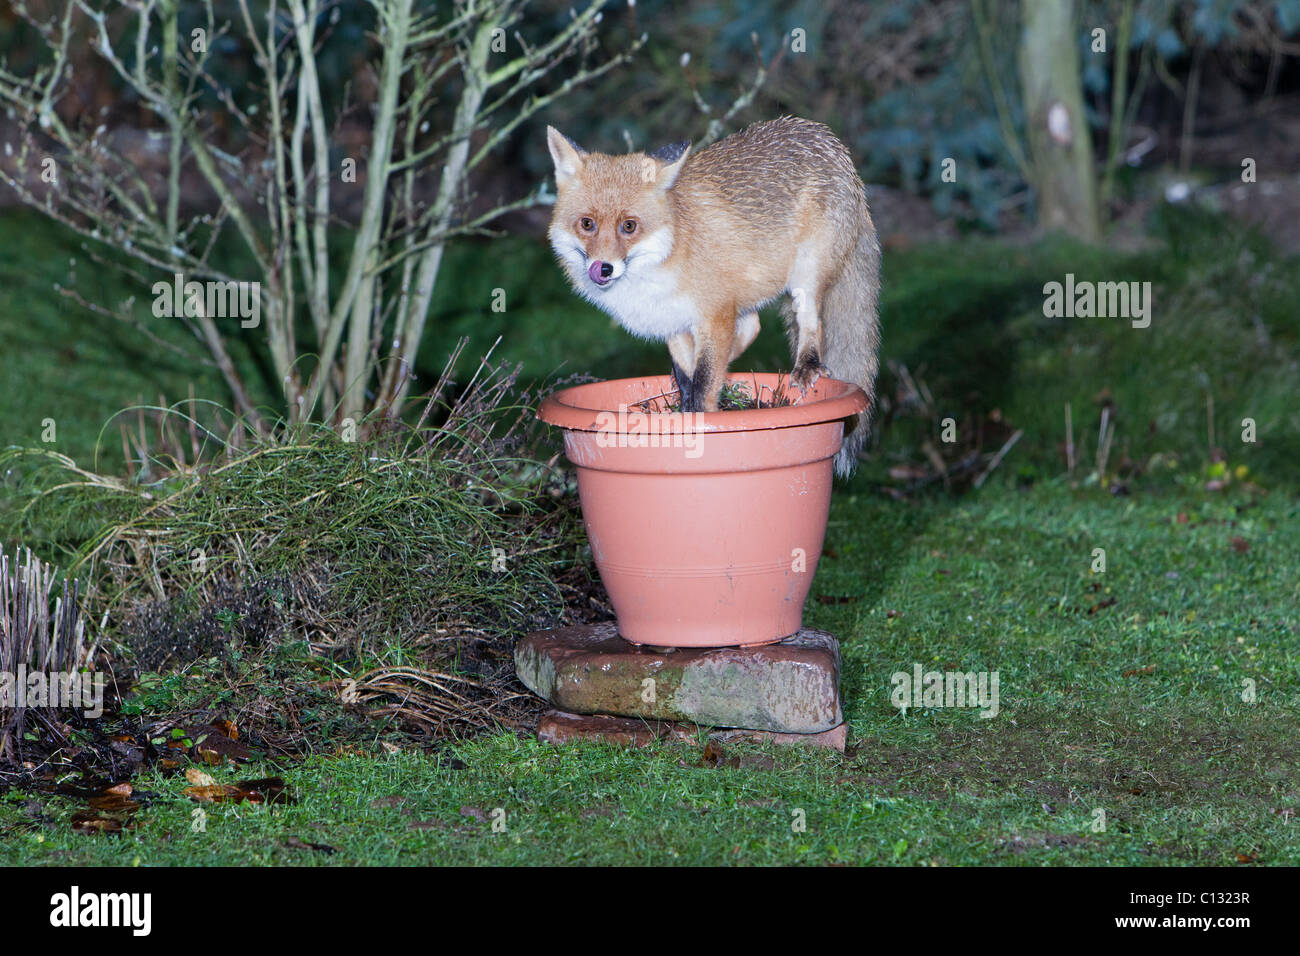 European Fox (Vulpes vulpes), in garden, searching for food in plant pot Stock Photo